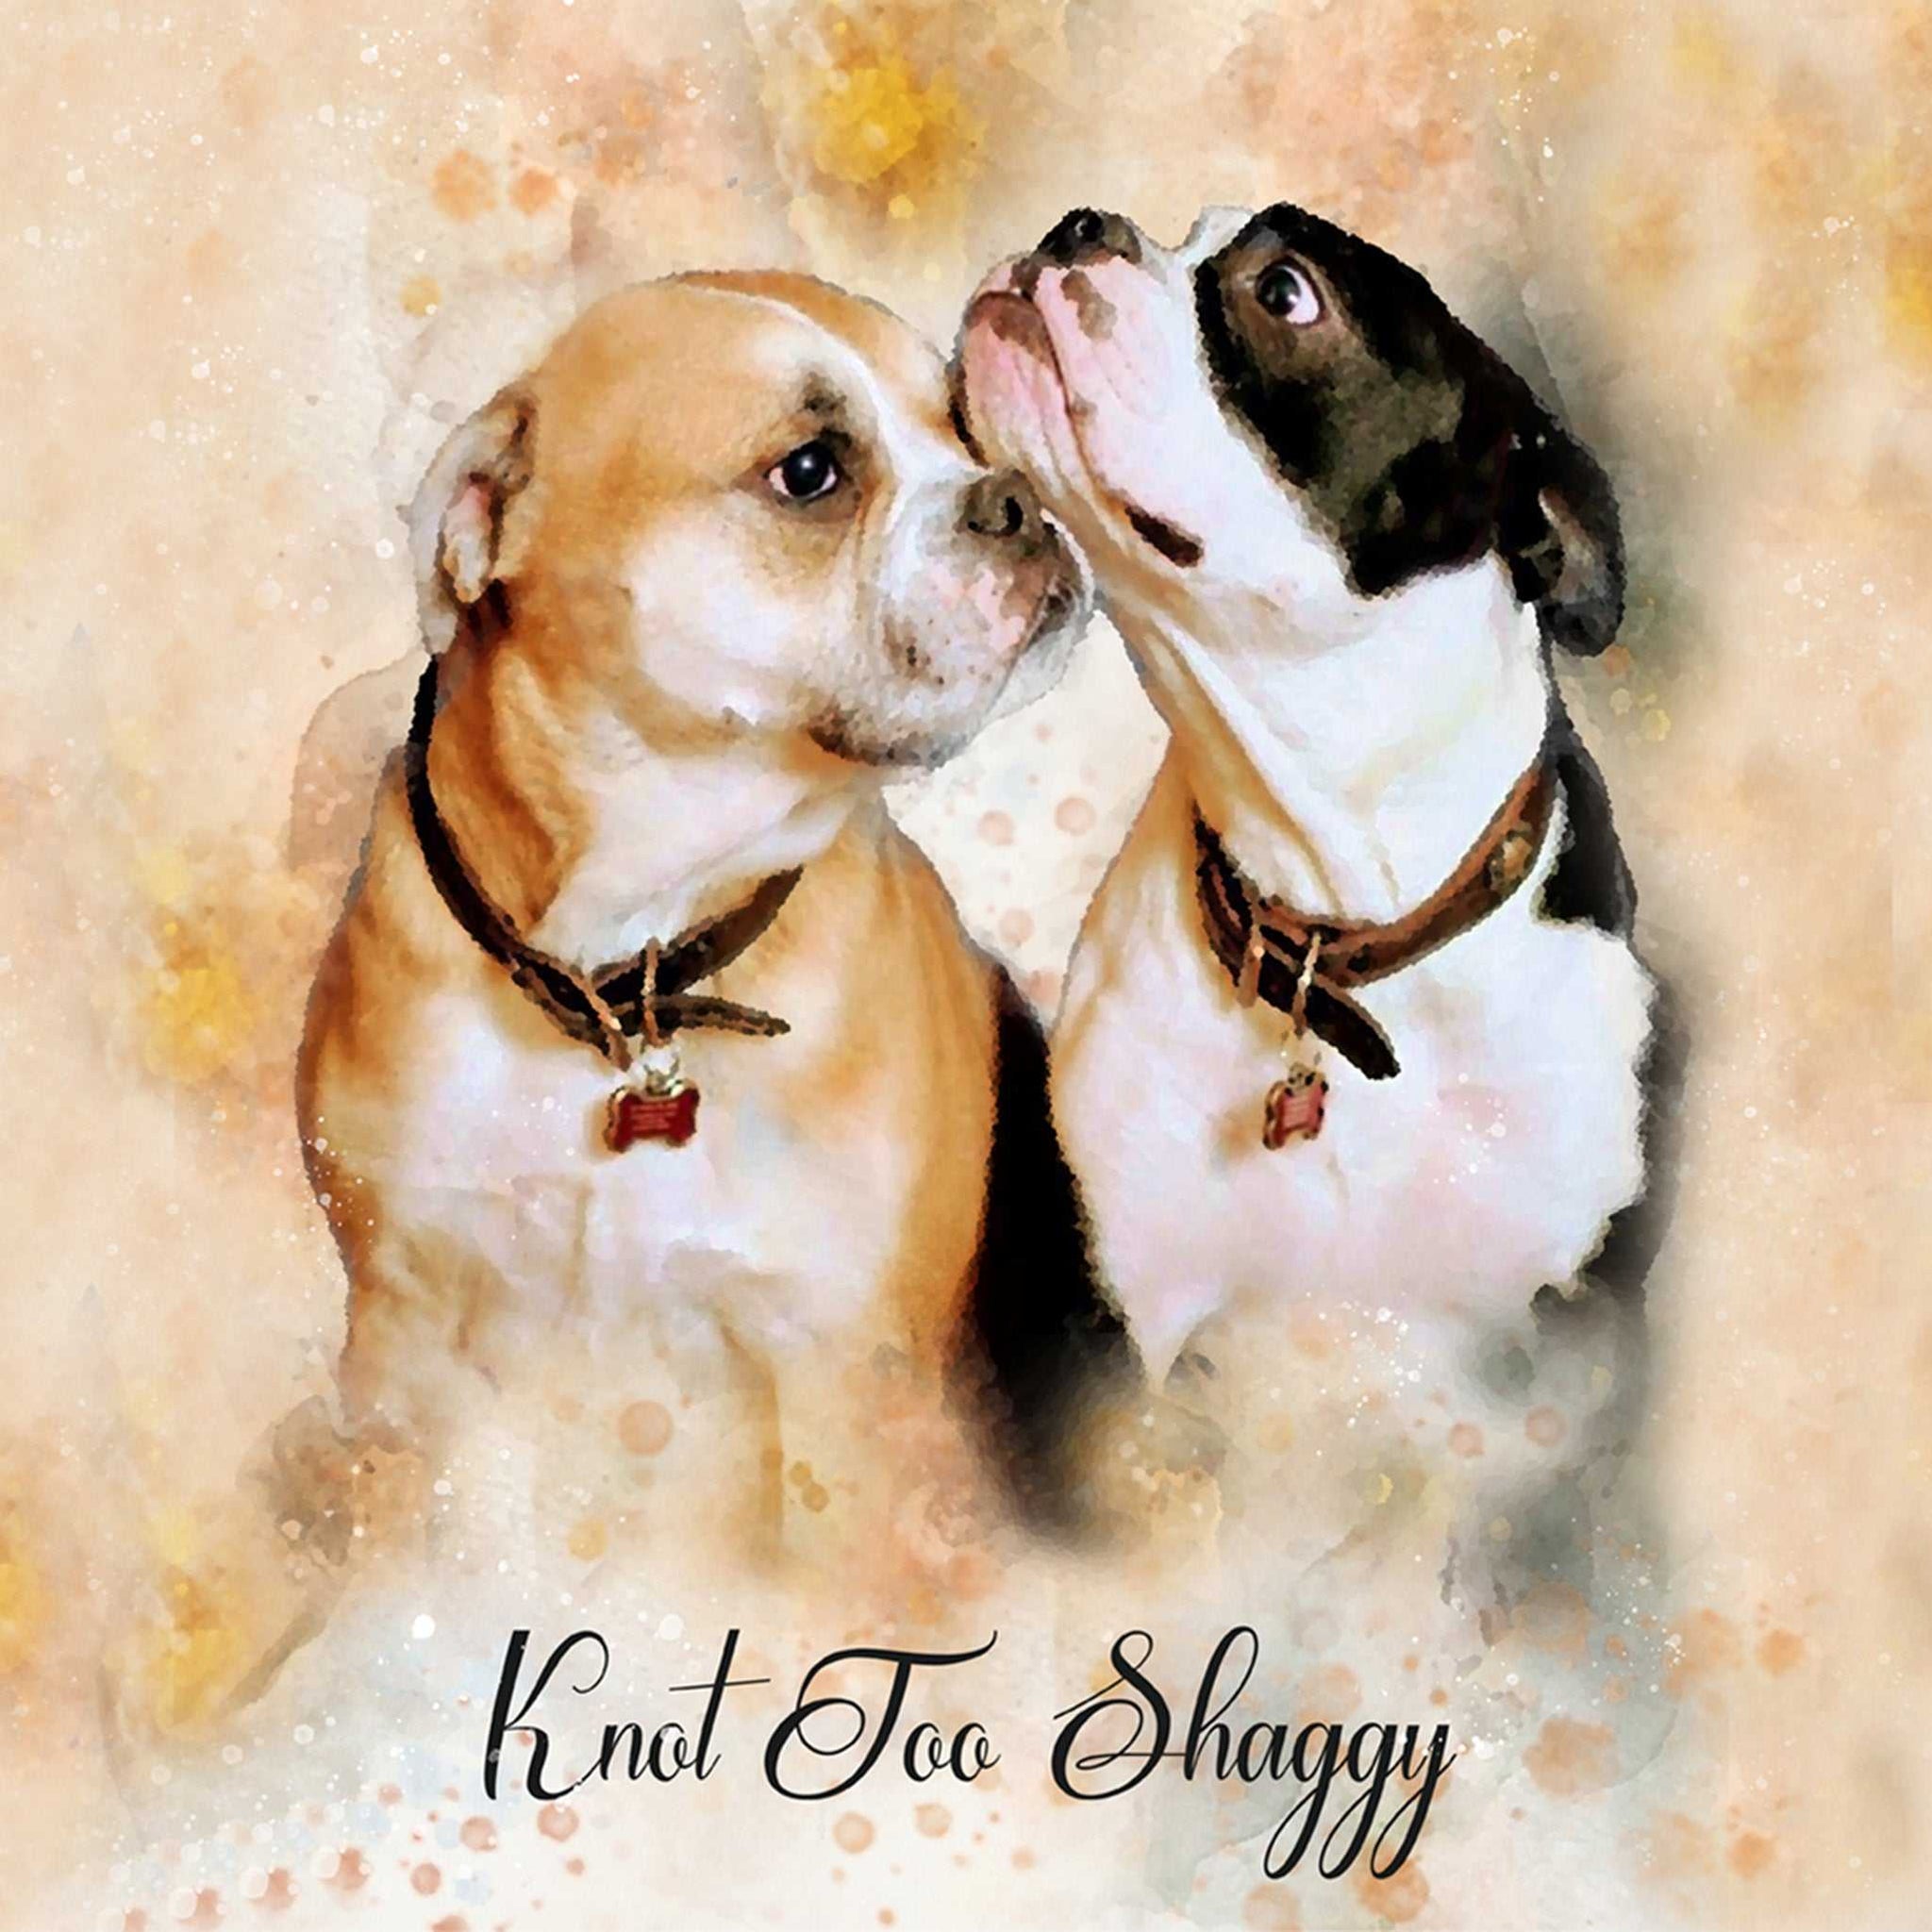 Custom Dog Loss Gifts | Dog Memorial Gifts | Dog Sympathy Gifts | Memorial Ideas for Dogs - FromPicToArt